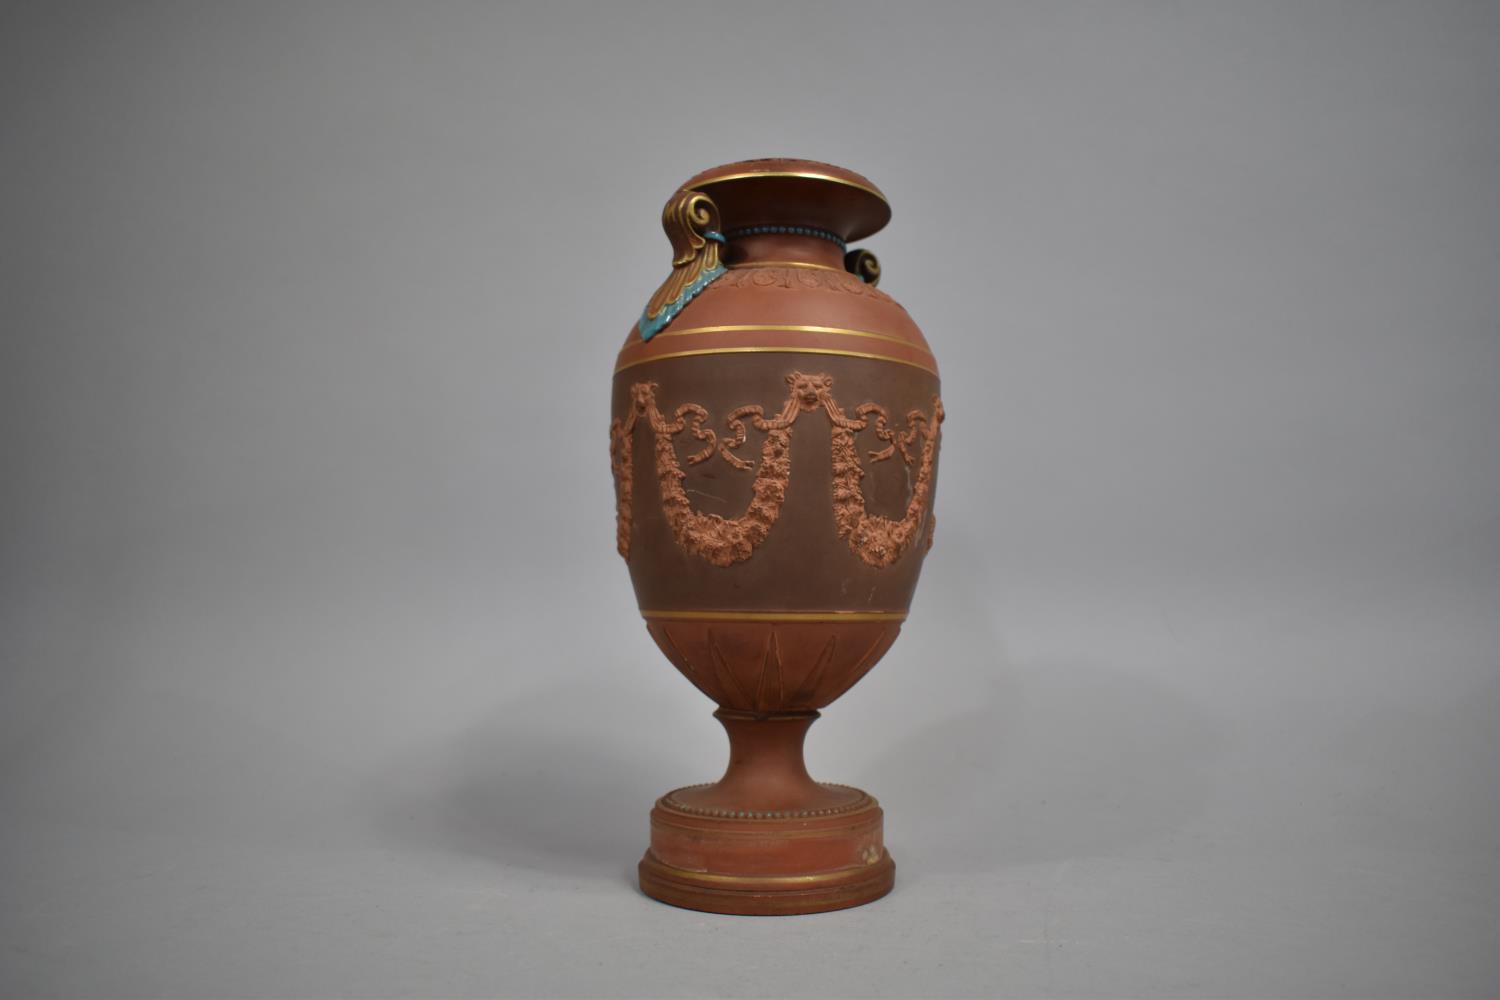 A Late 19th/20th Century Terracotta Two handled Vase with Floral Swag Decoration, Condition Issues - Image 2 of 2